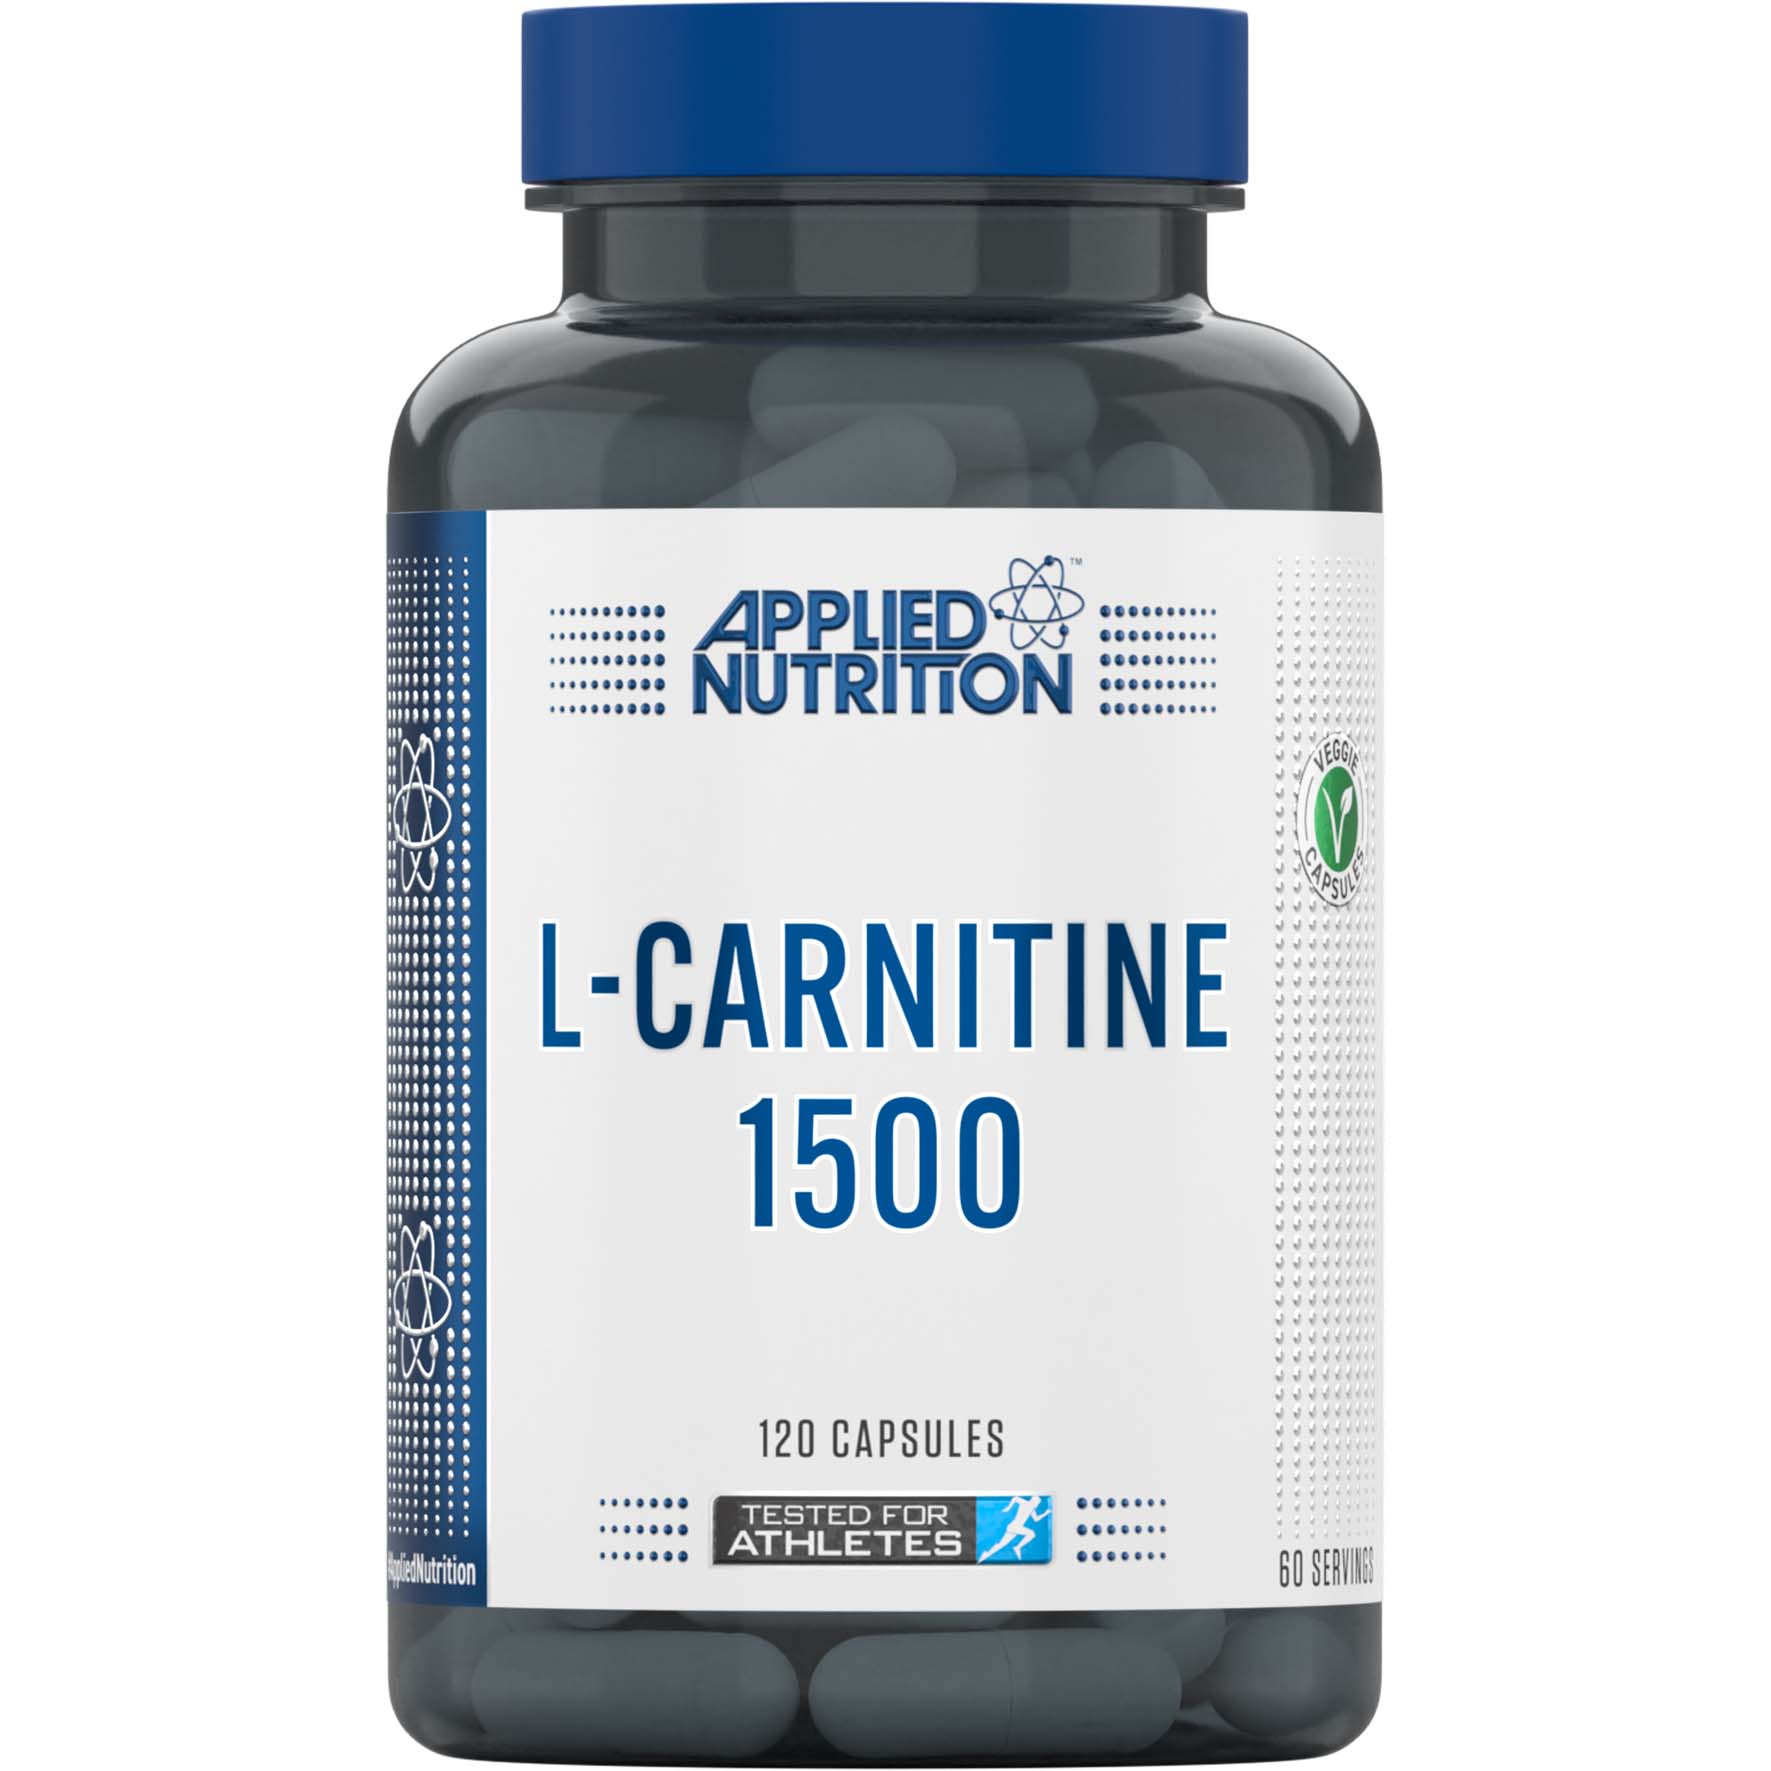 Applied Nutrition L Carnitine, 120 Capsules